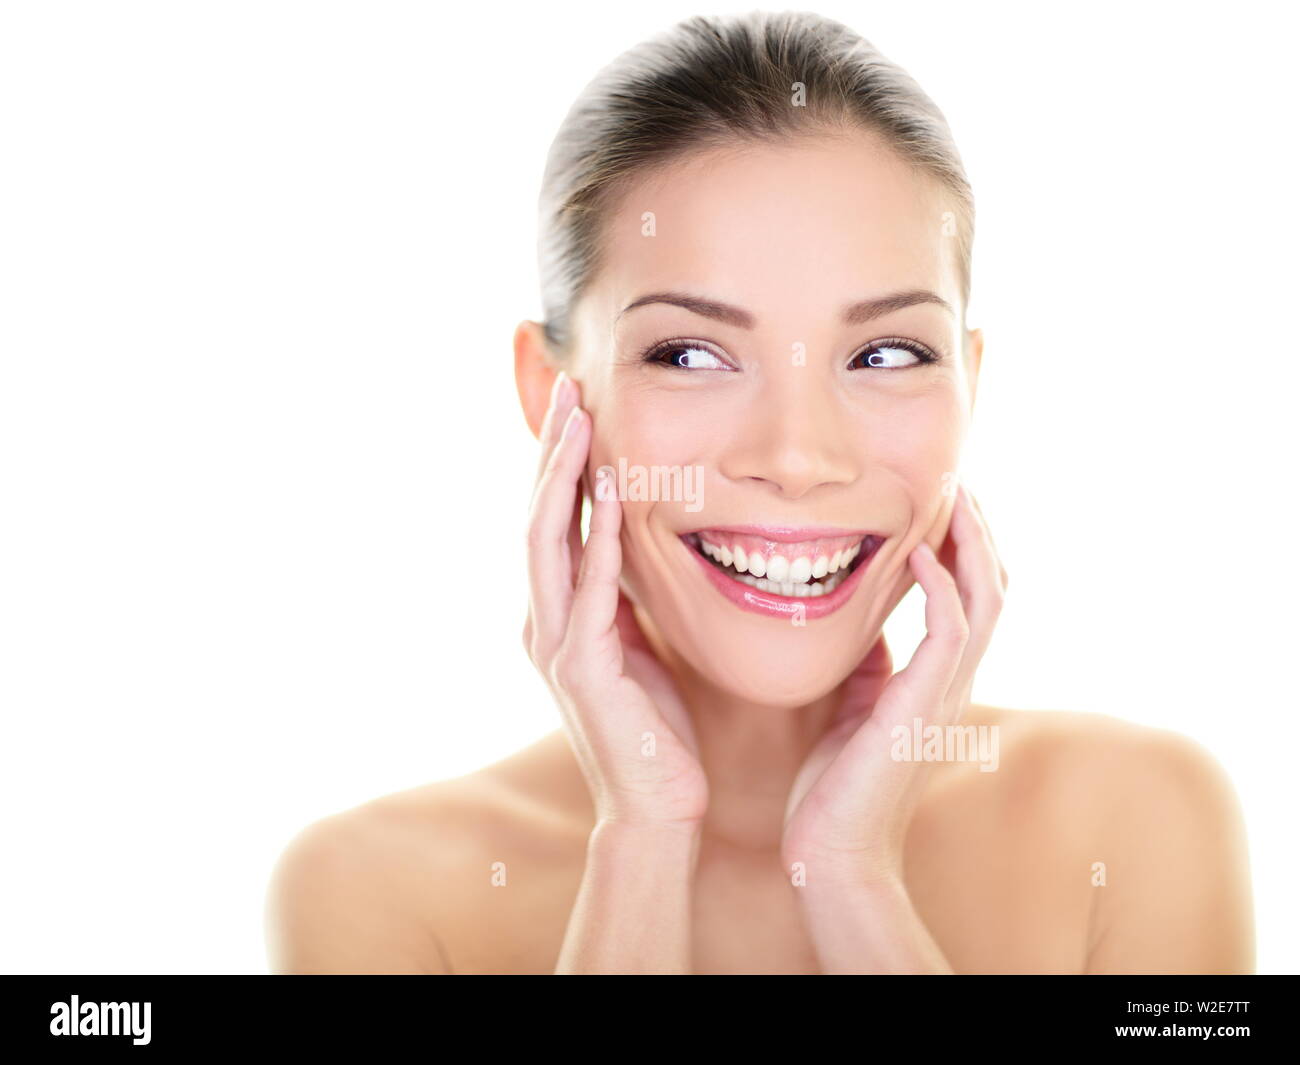 Beauty skin care woman looking at side laughing happy. Skincare asian beautiful woman touching face and perfect skin looking away for body care product advertisement. Multi-ethnic Asian girl fresh. Stock Photo